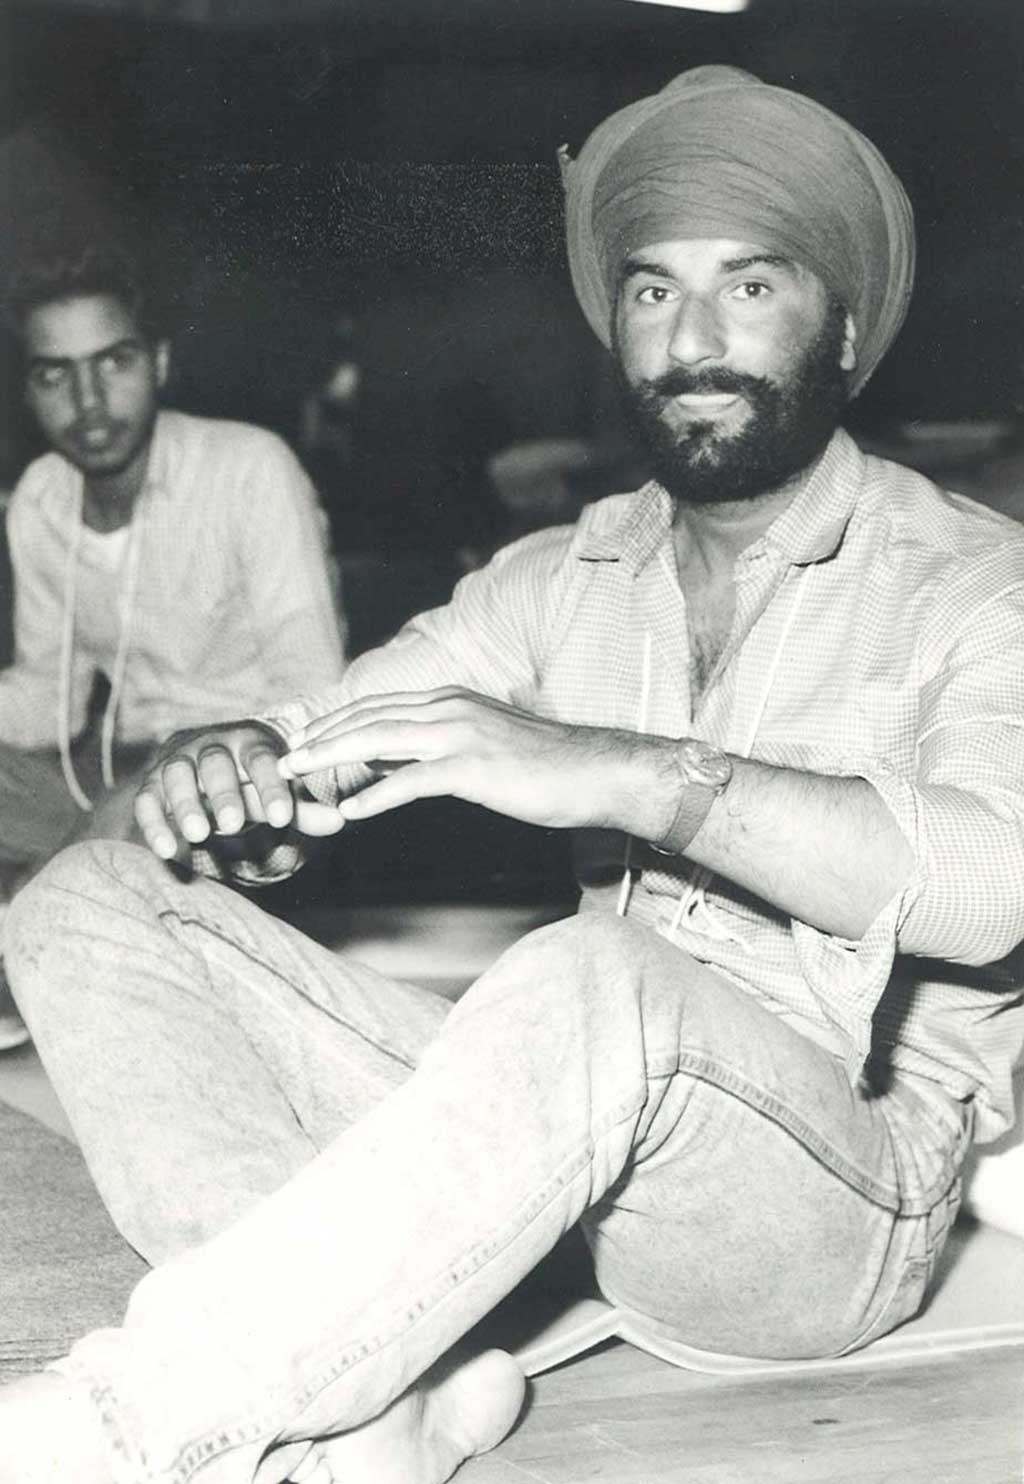 Two men sit on the floor with their legs crossed.
